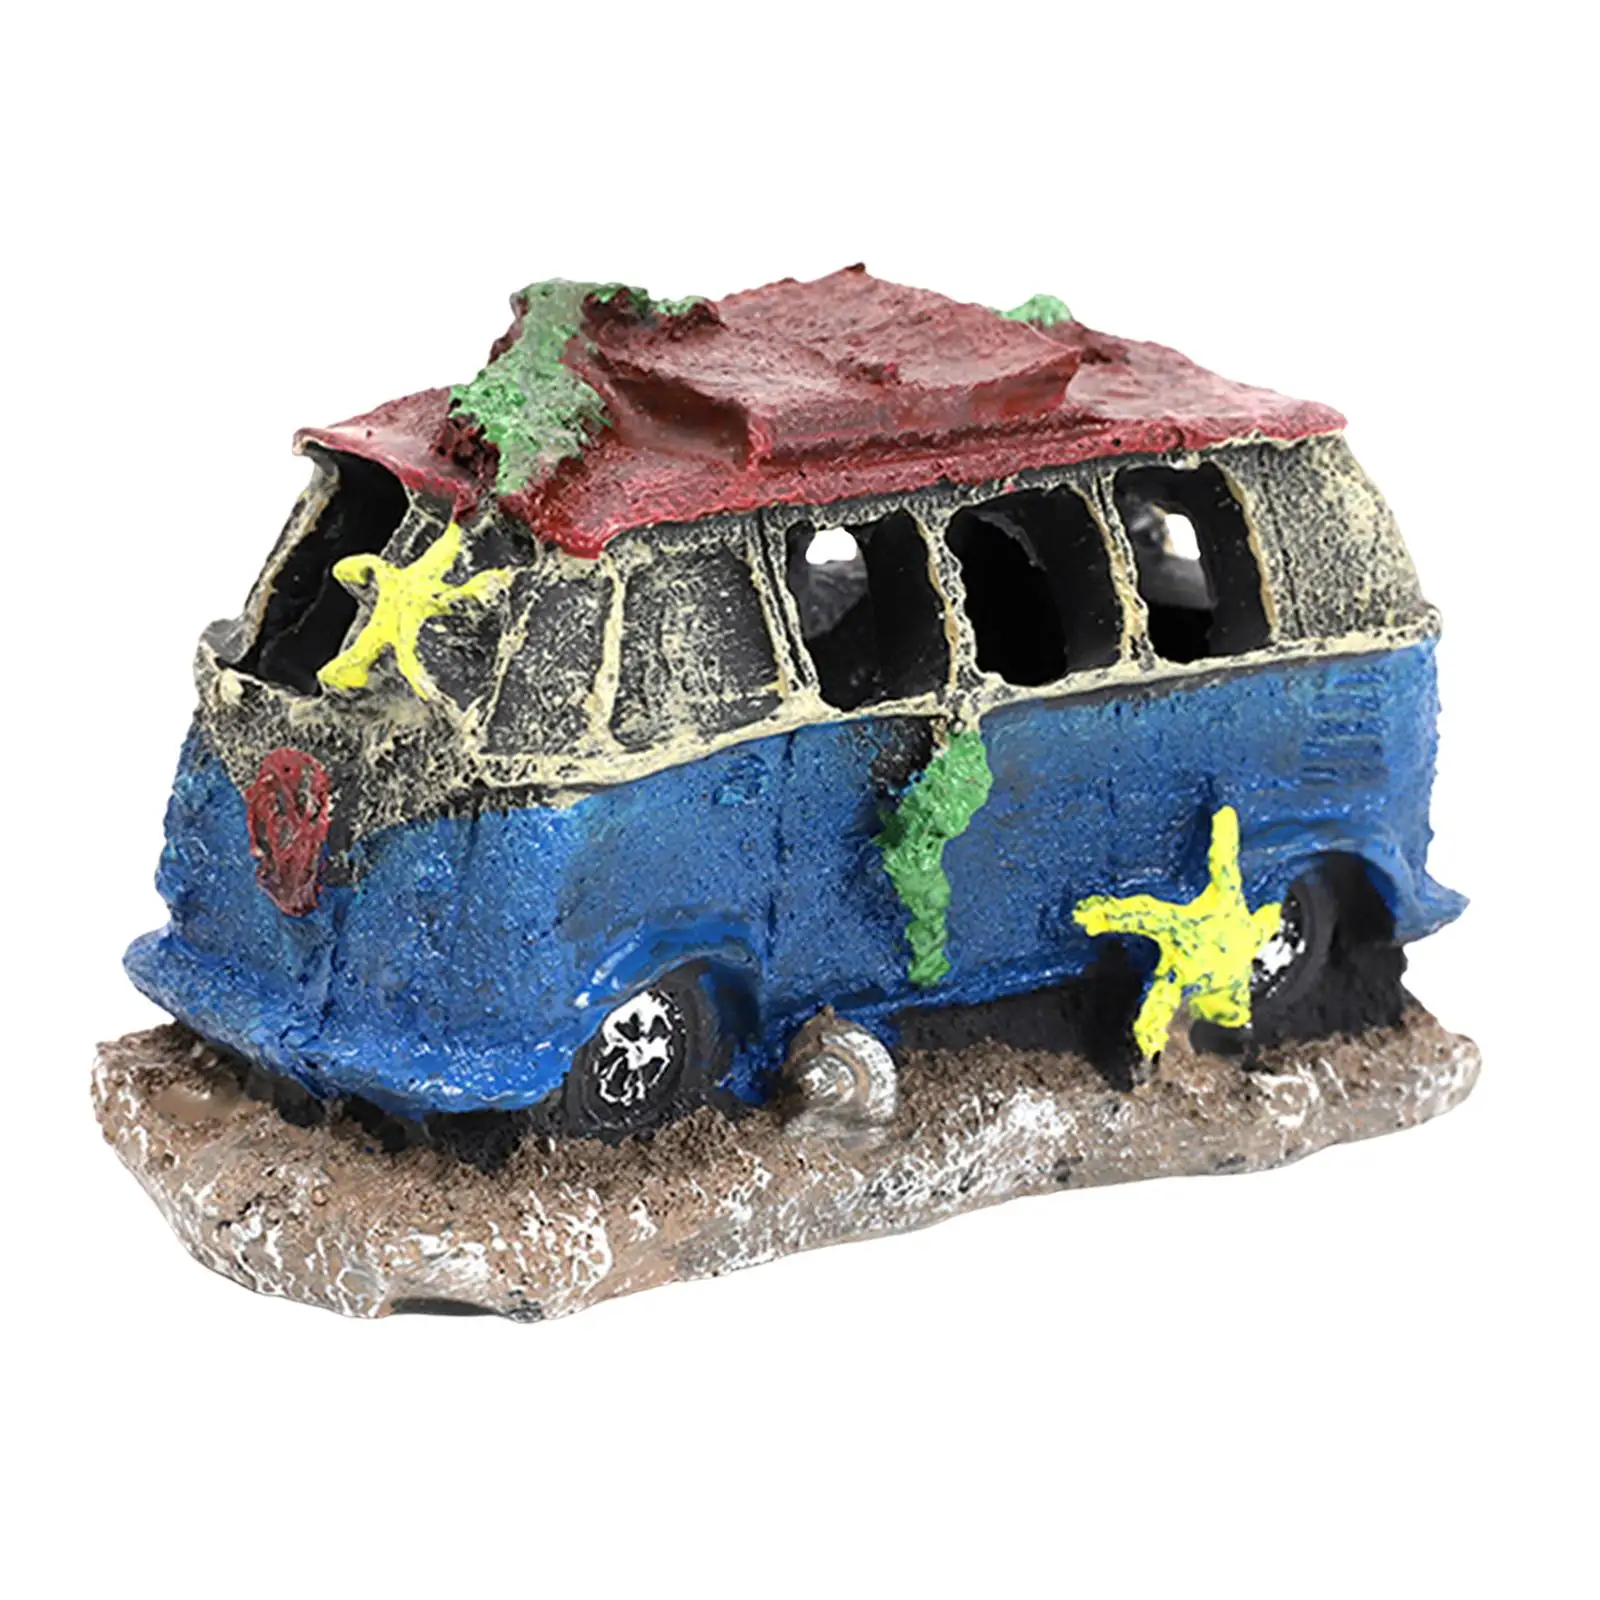 Auto Wreck Aquarium Decoration Fish Tank Ornament House for Spawning Aquatic Pets to Breed Small Fish Crustaceans Rest Play